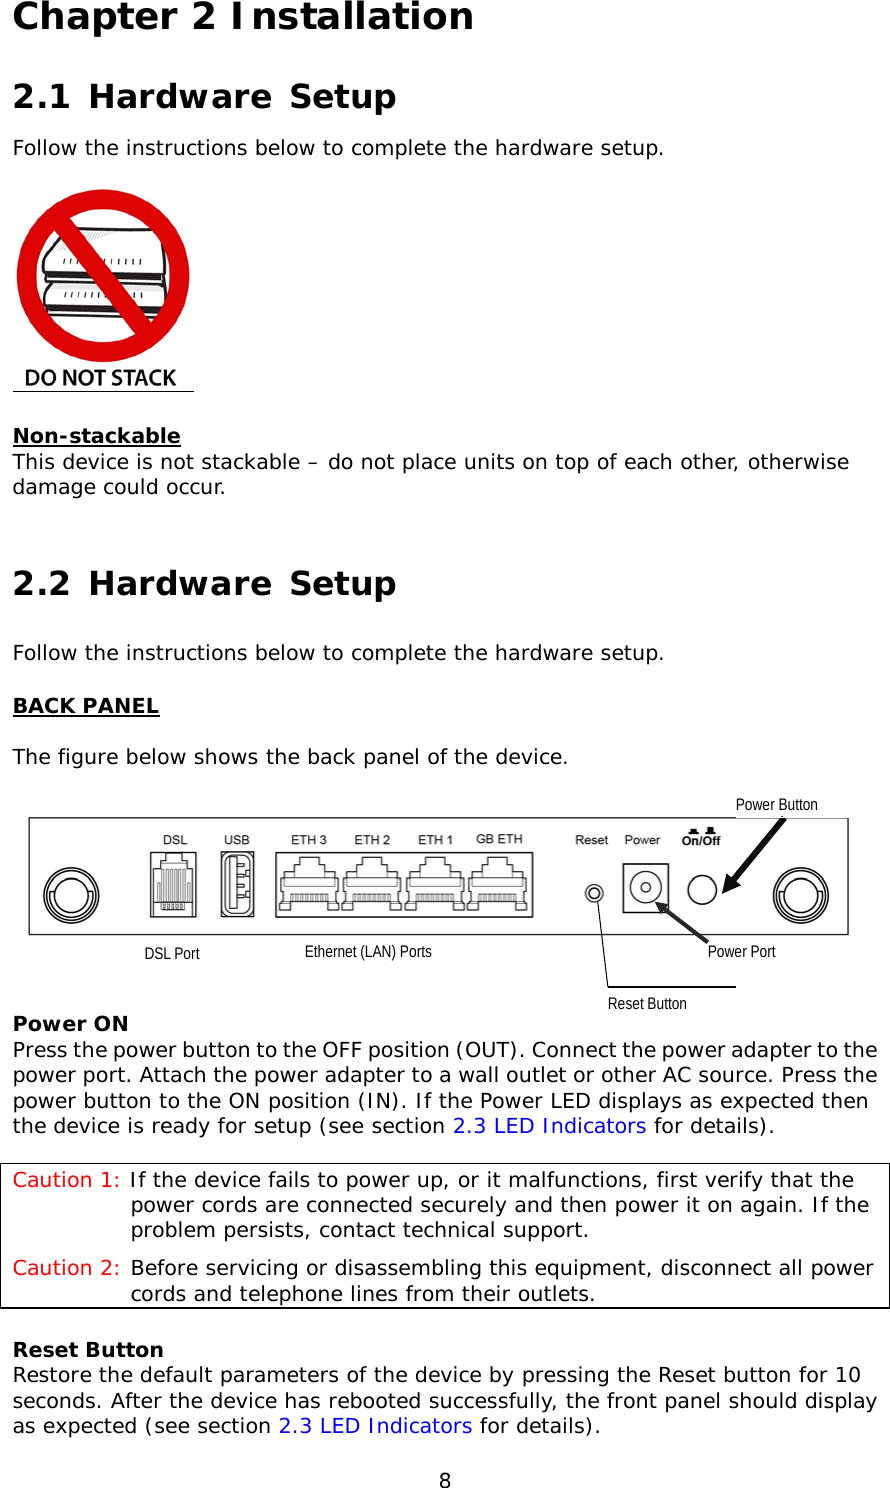  8 Chapter 2 Installation 2.1 Hardware Setup  Follow the instructions below to complete the hardware setup.    Non-stackable This device is not stackable – do not place units on top of each other, otherwise damage could occur.  2.2 Hardware Setup  Follow the instructions below to complete the hardware setup. BACK PANEL  The figure below shows the back panel of the device.      Power ON Press the power button to the OFF position (OUT). Connect the power adapter to the power port. Attach the power adapter to a wall outlet or other AC source. Press the power button to the ON position (IN). If the Power LED displays as expected then the device is ready for setup (see section 2.3 LED Indicators for details).  Caution 1: If the device fails to power up, or it malfunctions, first verify that the power cords are connected securely and then power it on again. If the problem persists, contact technical support. Caution 2: Before servicing or disassembling this equipment, disconnect all power cords and telephone lines from their outlets. Reset Button Restore the default parameters of the device by pressing the Reset button for 10 seconds. After the device has rebooted successfully, the front panel should display as expected (see section 2.3 LED Indicators for details).   Reset Button Power Port Ethernet (LAN) Ports      DSL Port Power Button       